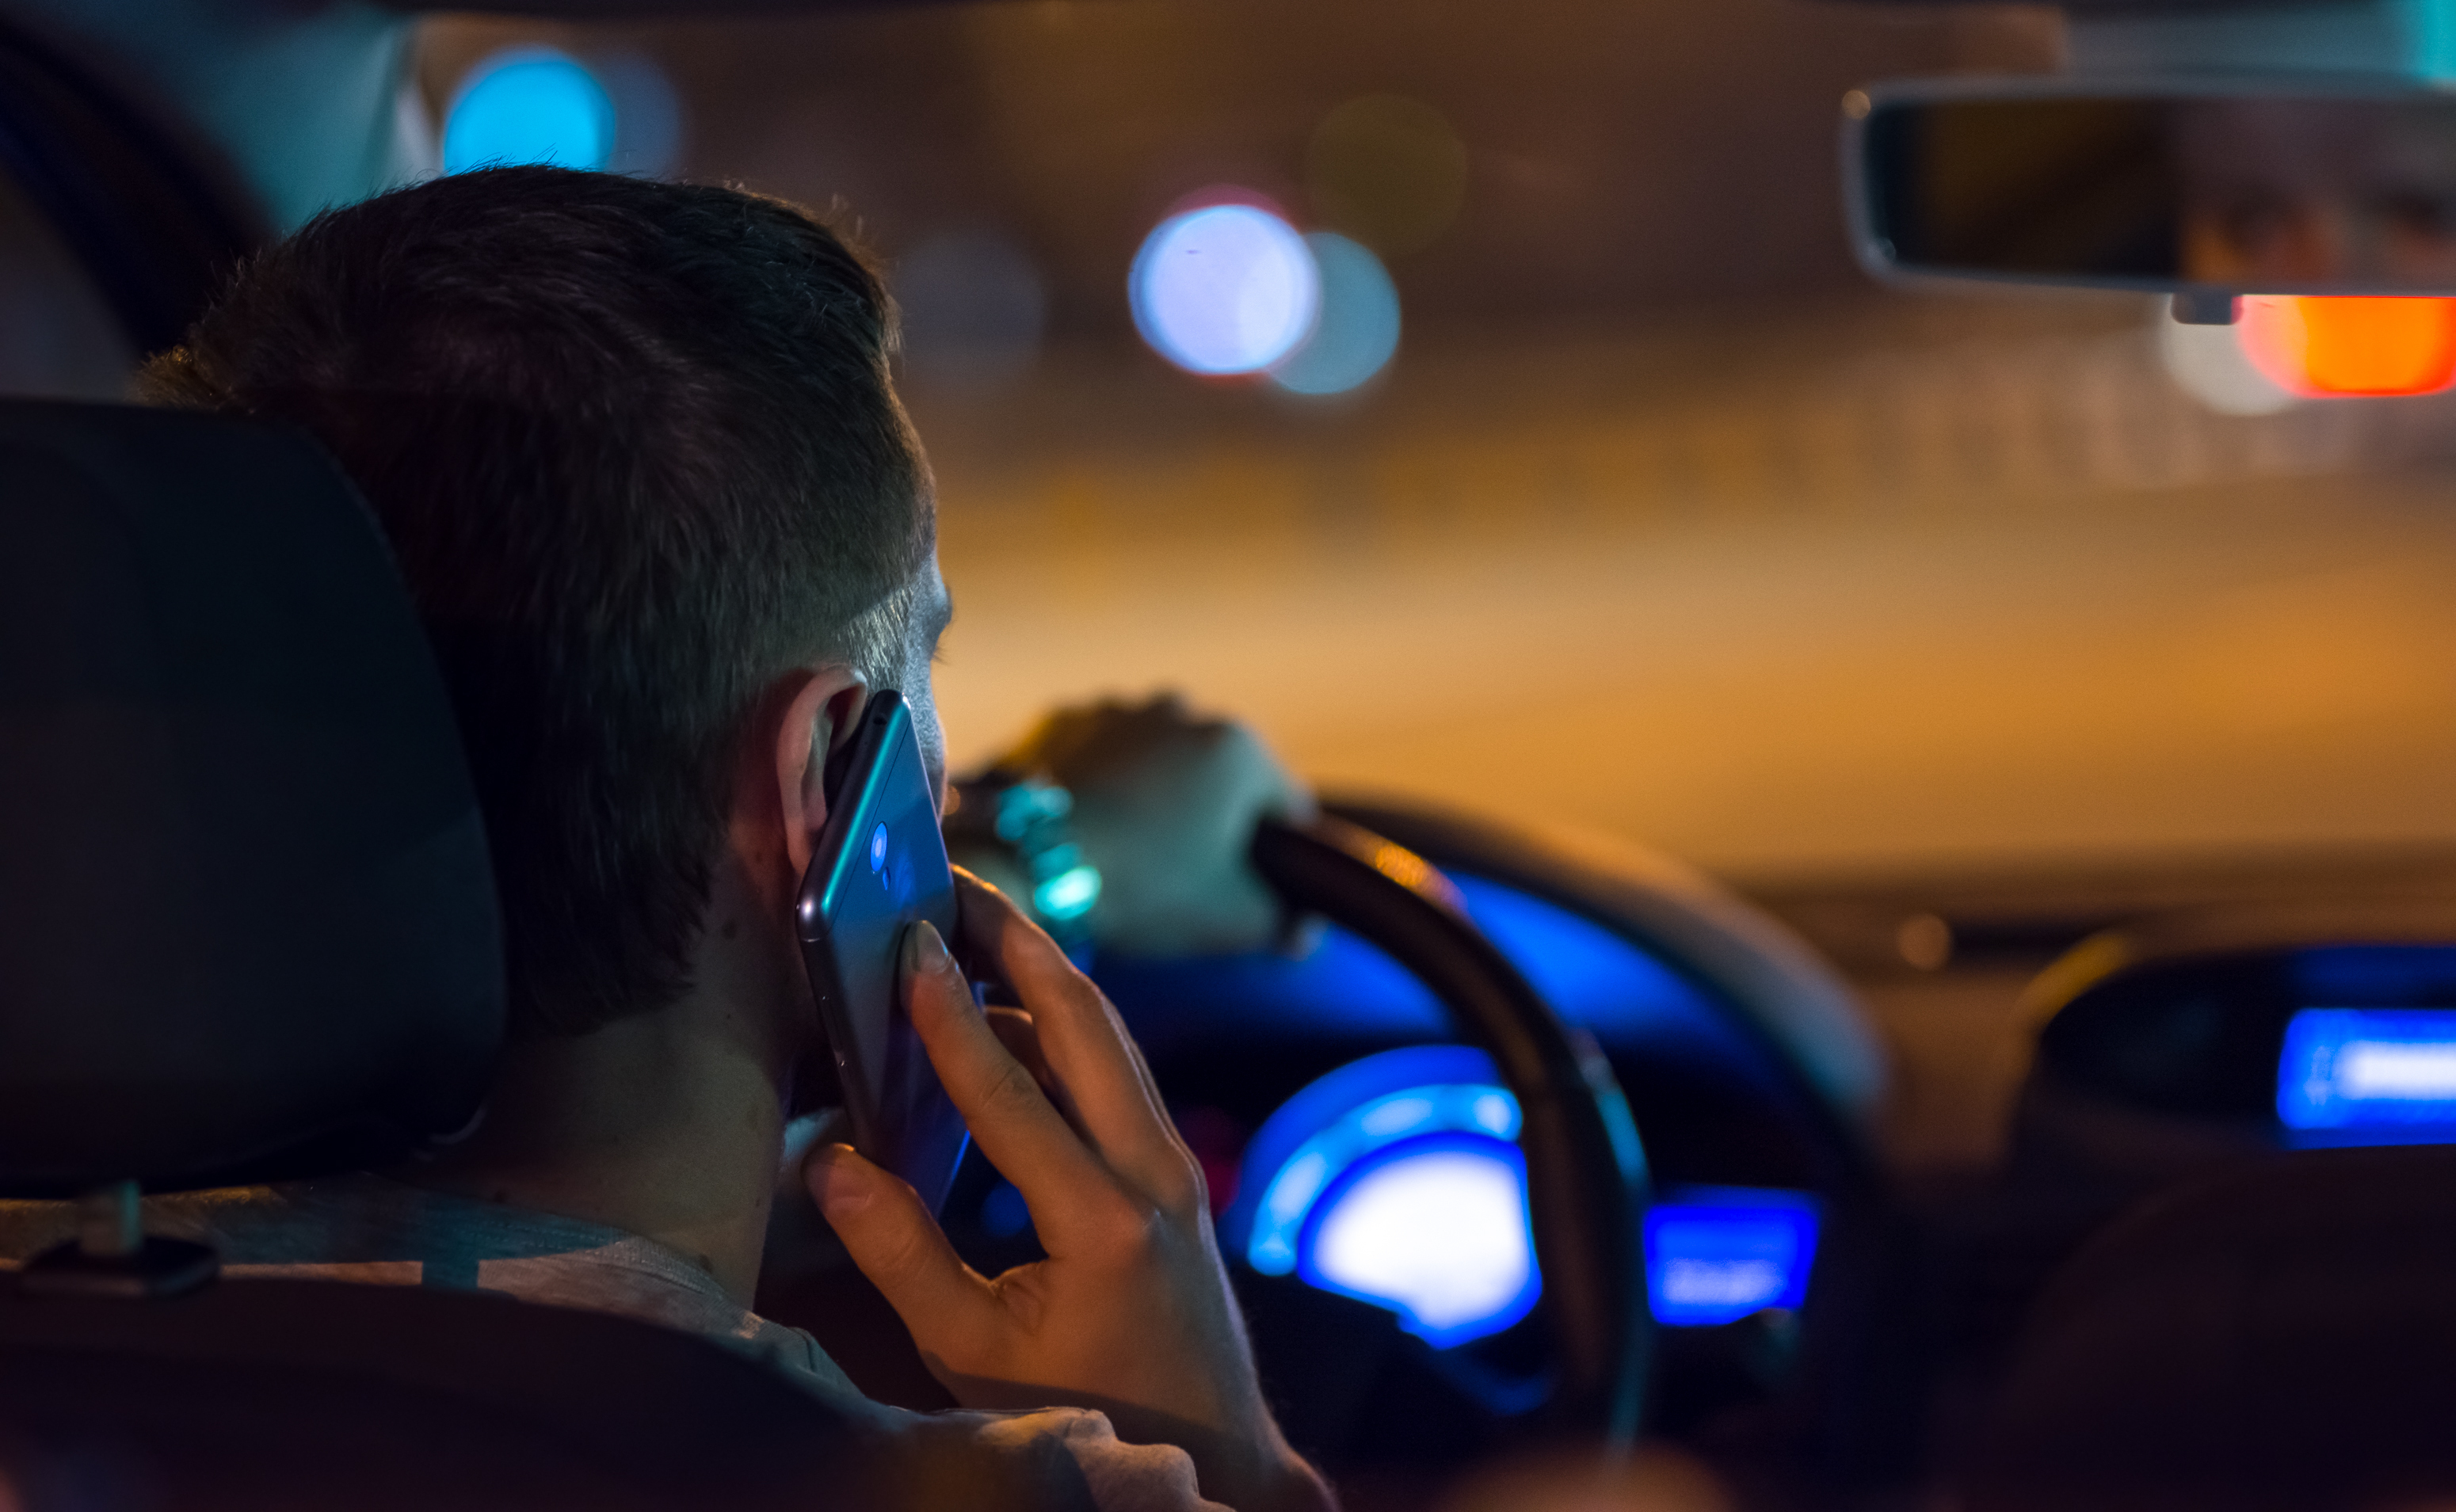 The man drive a car in the city and phone. | Source: Shutterstock